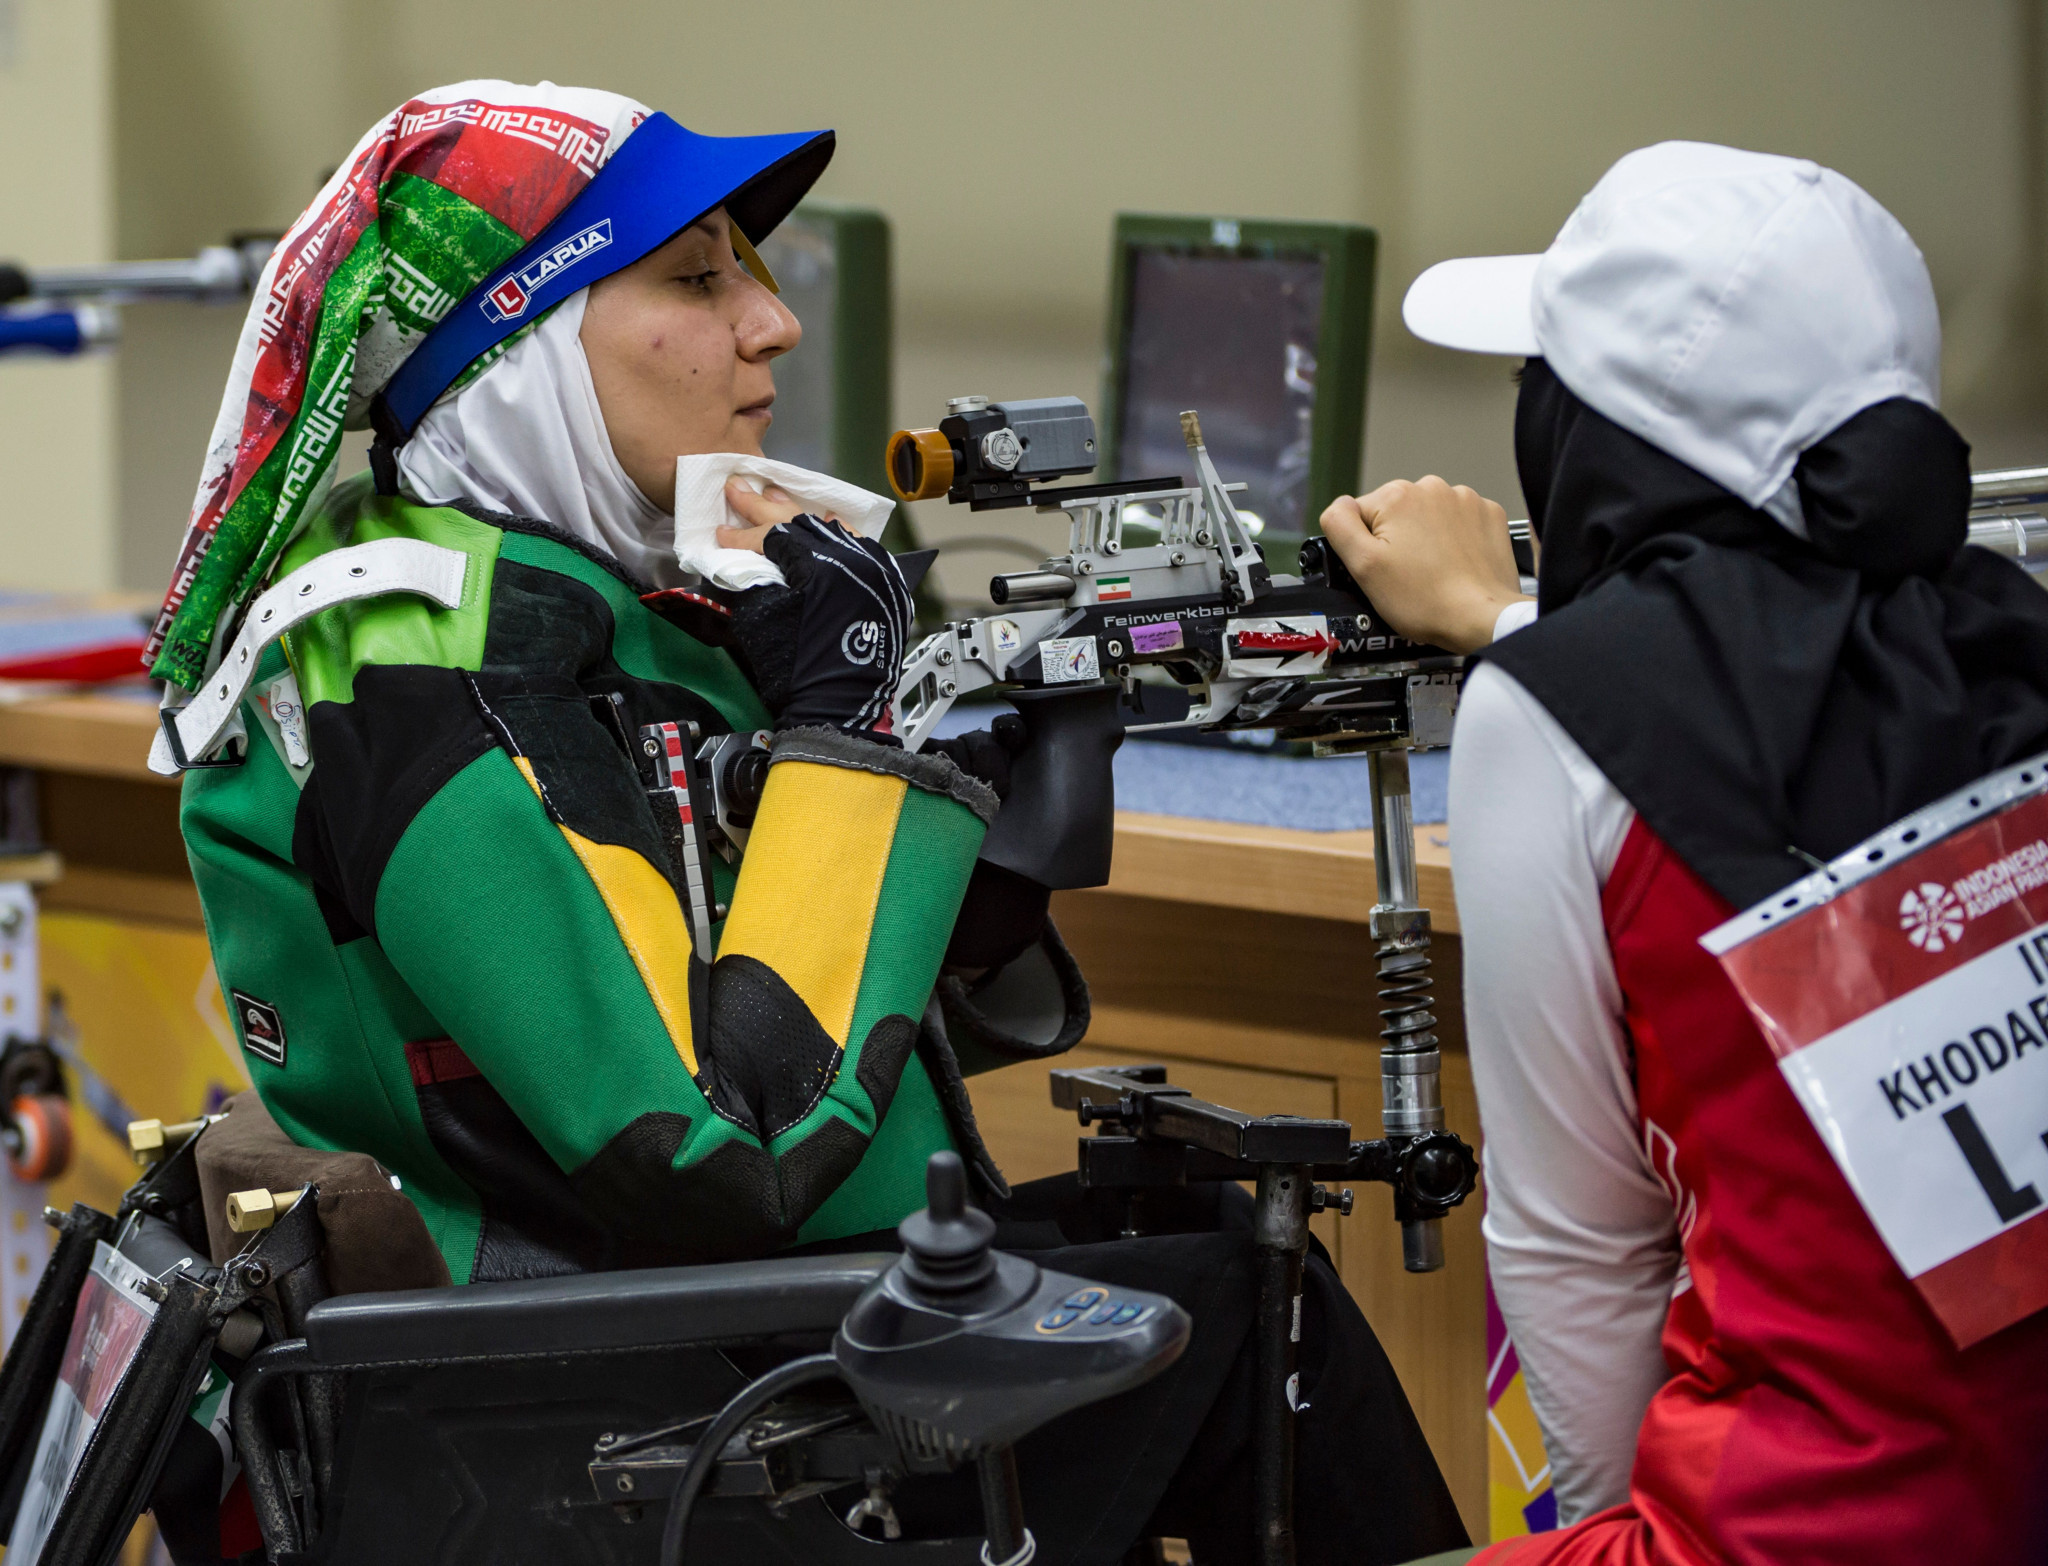 Iran finished third in the medal table at the 2018 Asian Para Games in Jakarta ©Getty Images